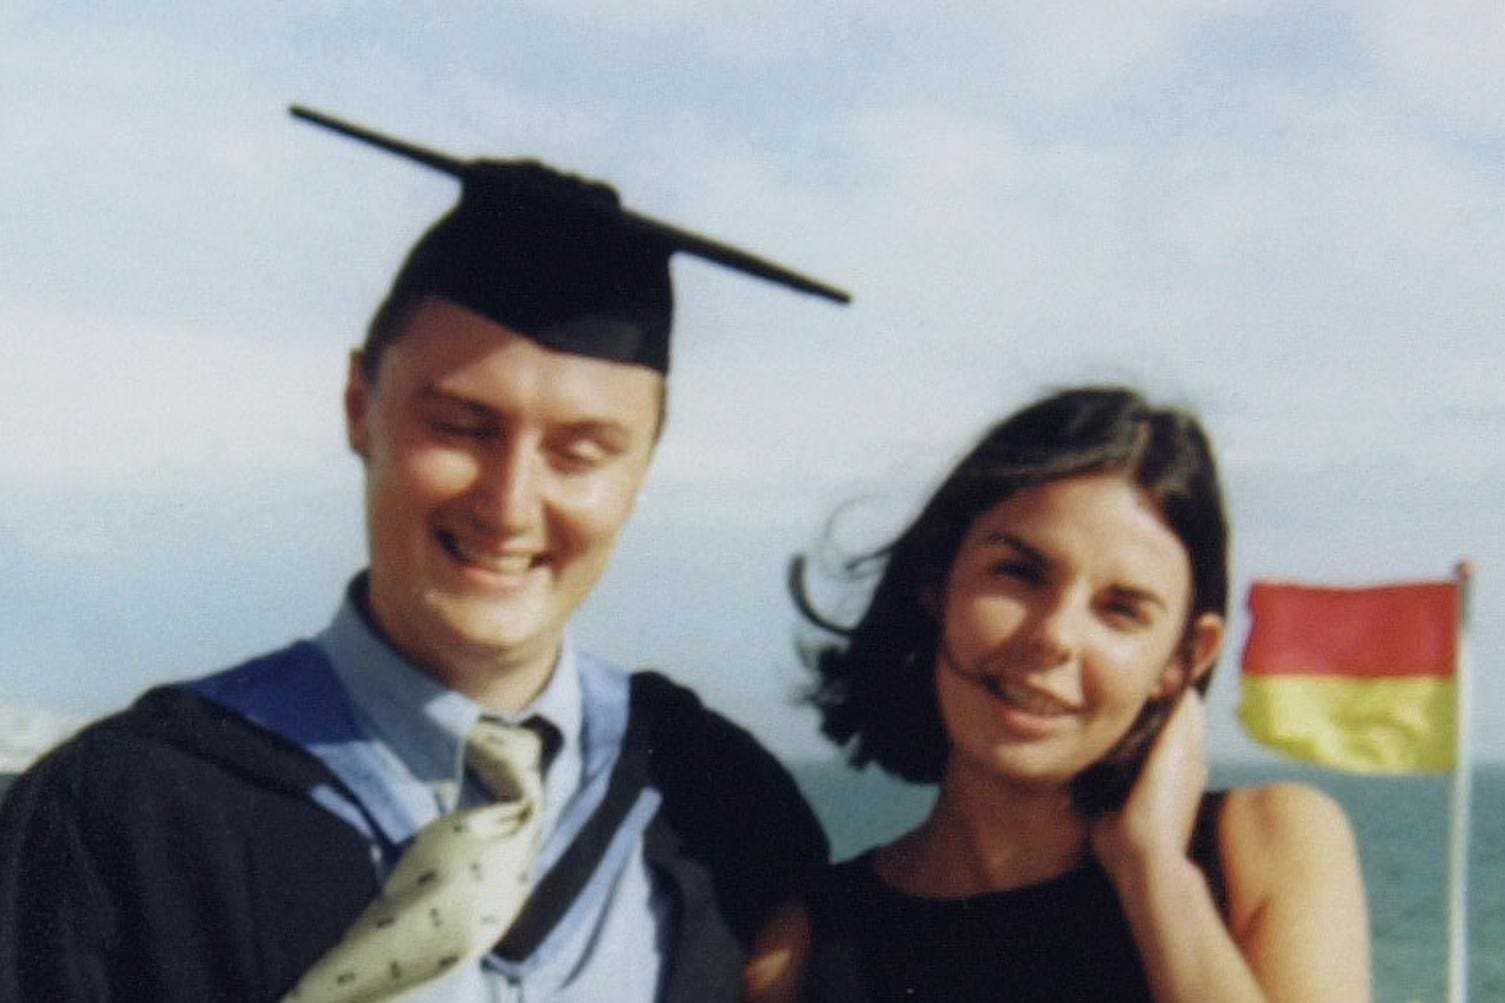 Murdered backpacker Peter Falconio and Joanne Lees